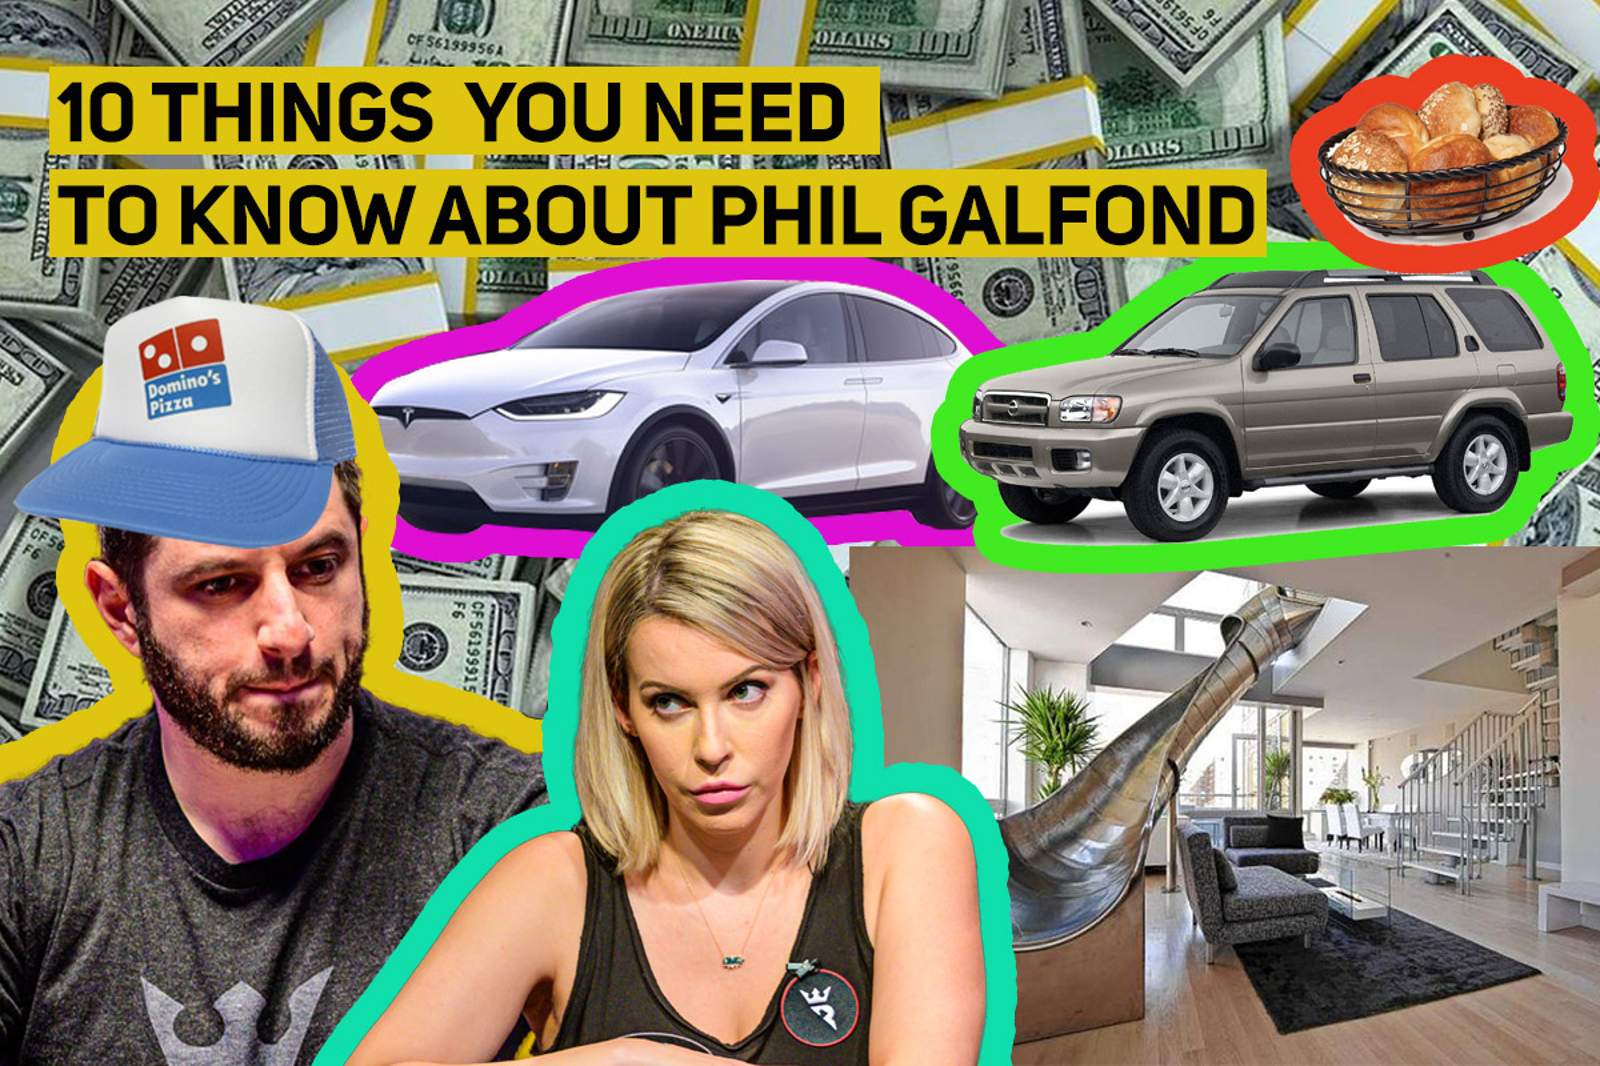 Ten Things You Need to Know About Phil Galfond